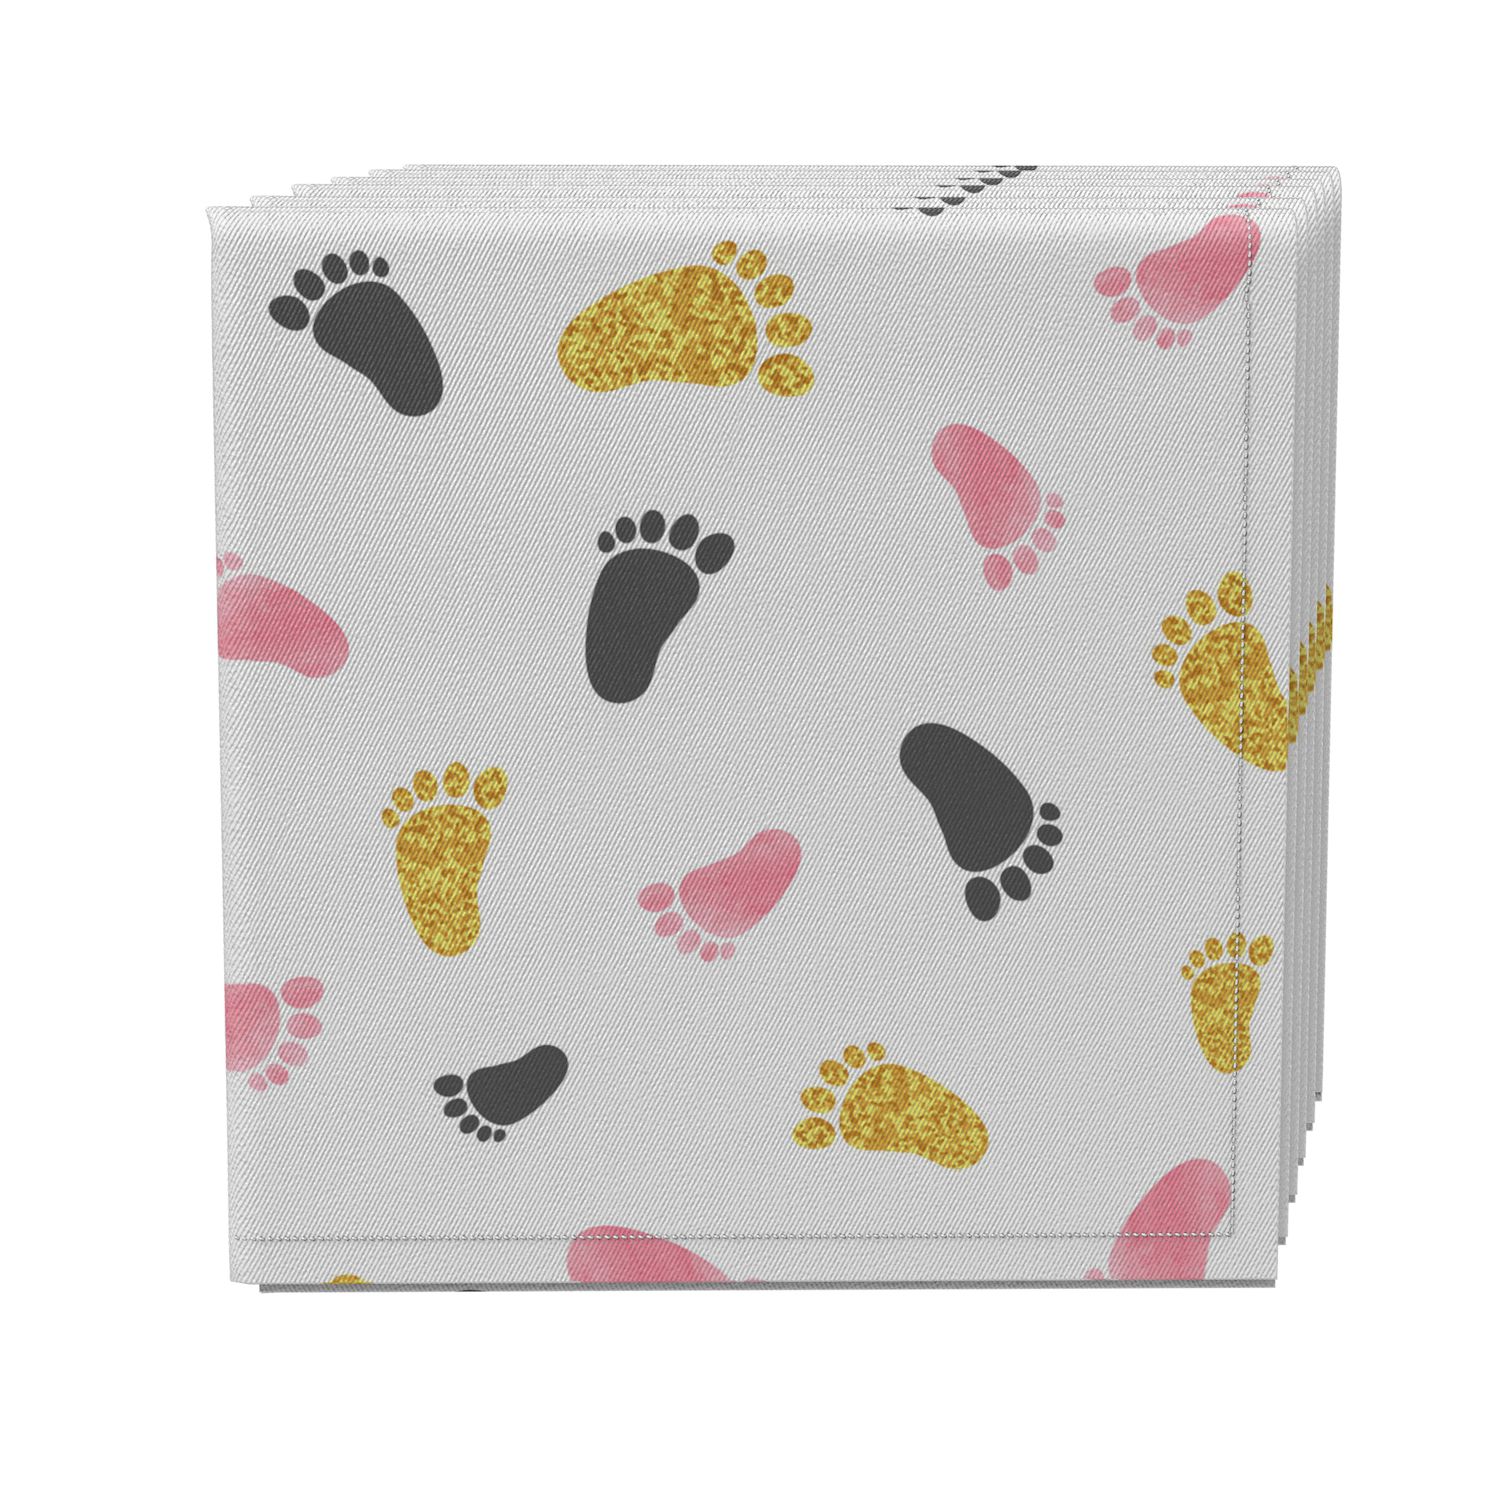 Keababies 4pk Inkless Hand And Footprint Kit, Ink Pad For Baby